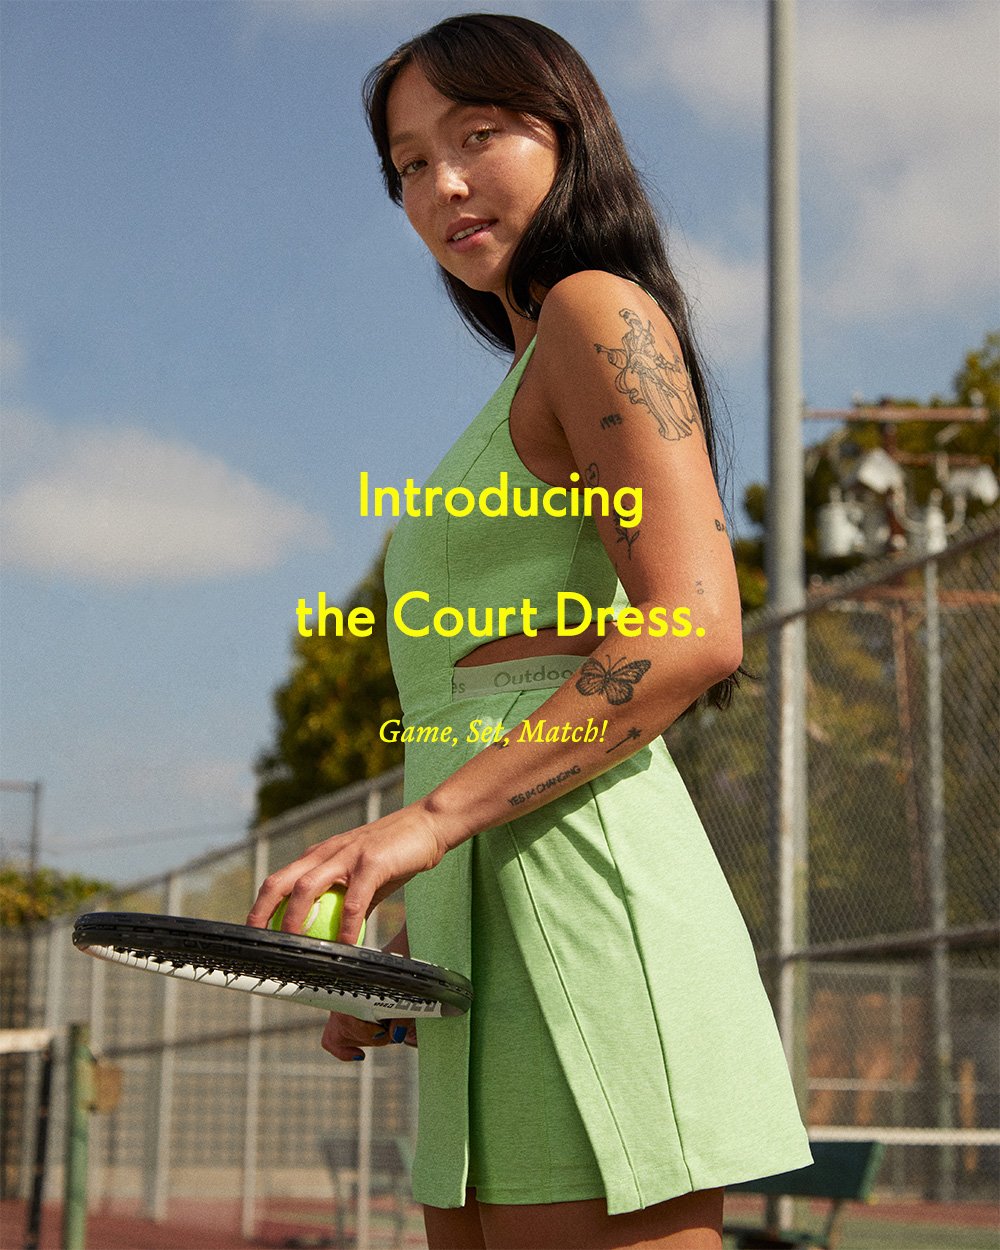 outdoor voices: New: The Court Dress